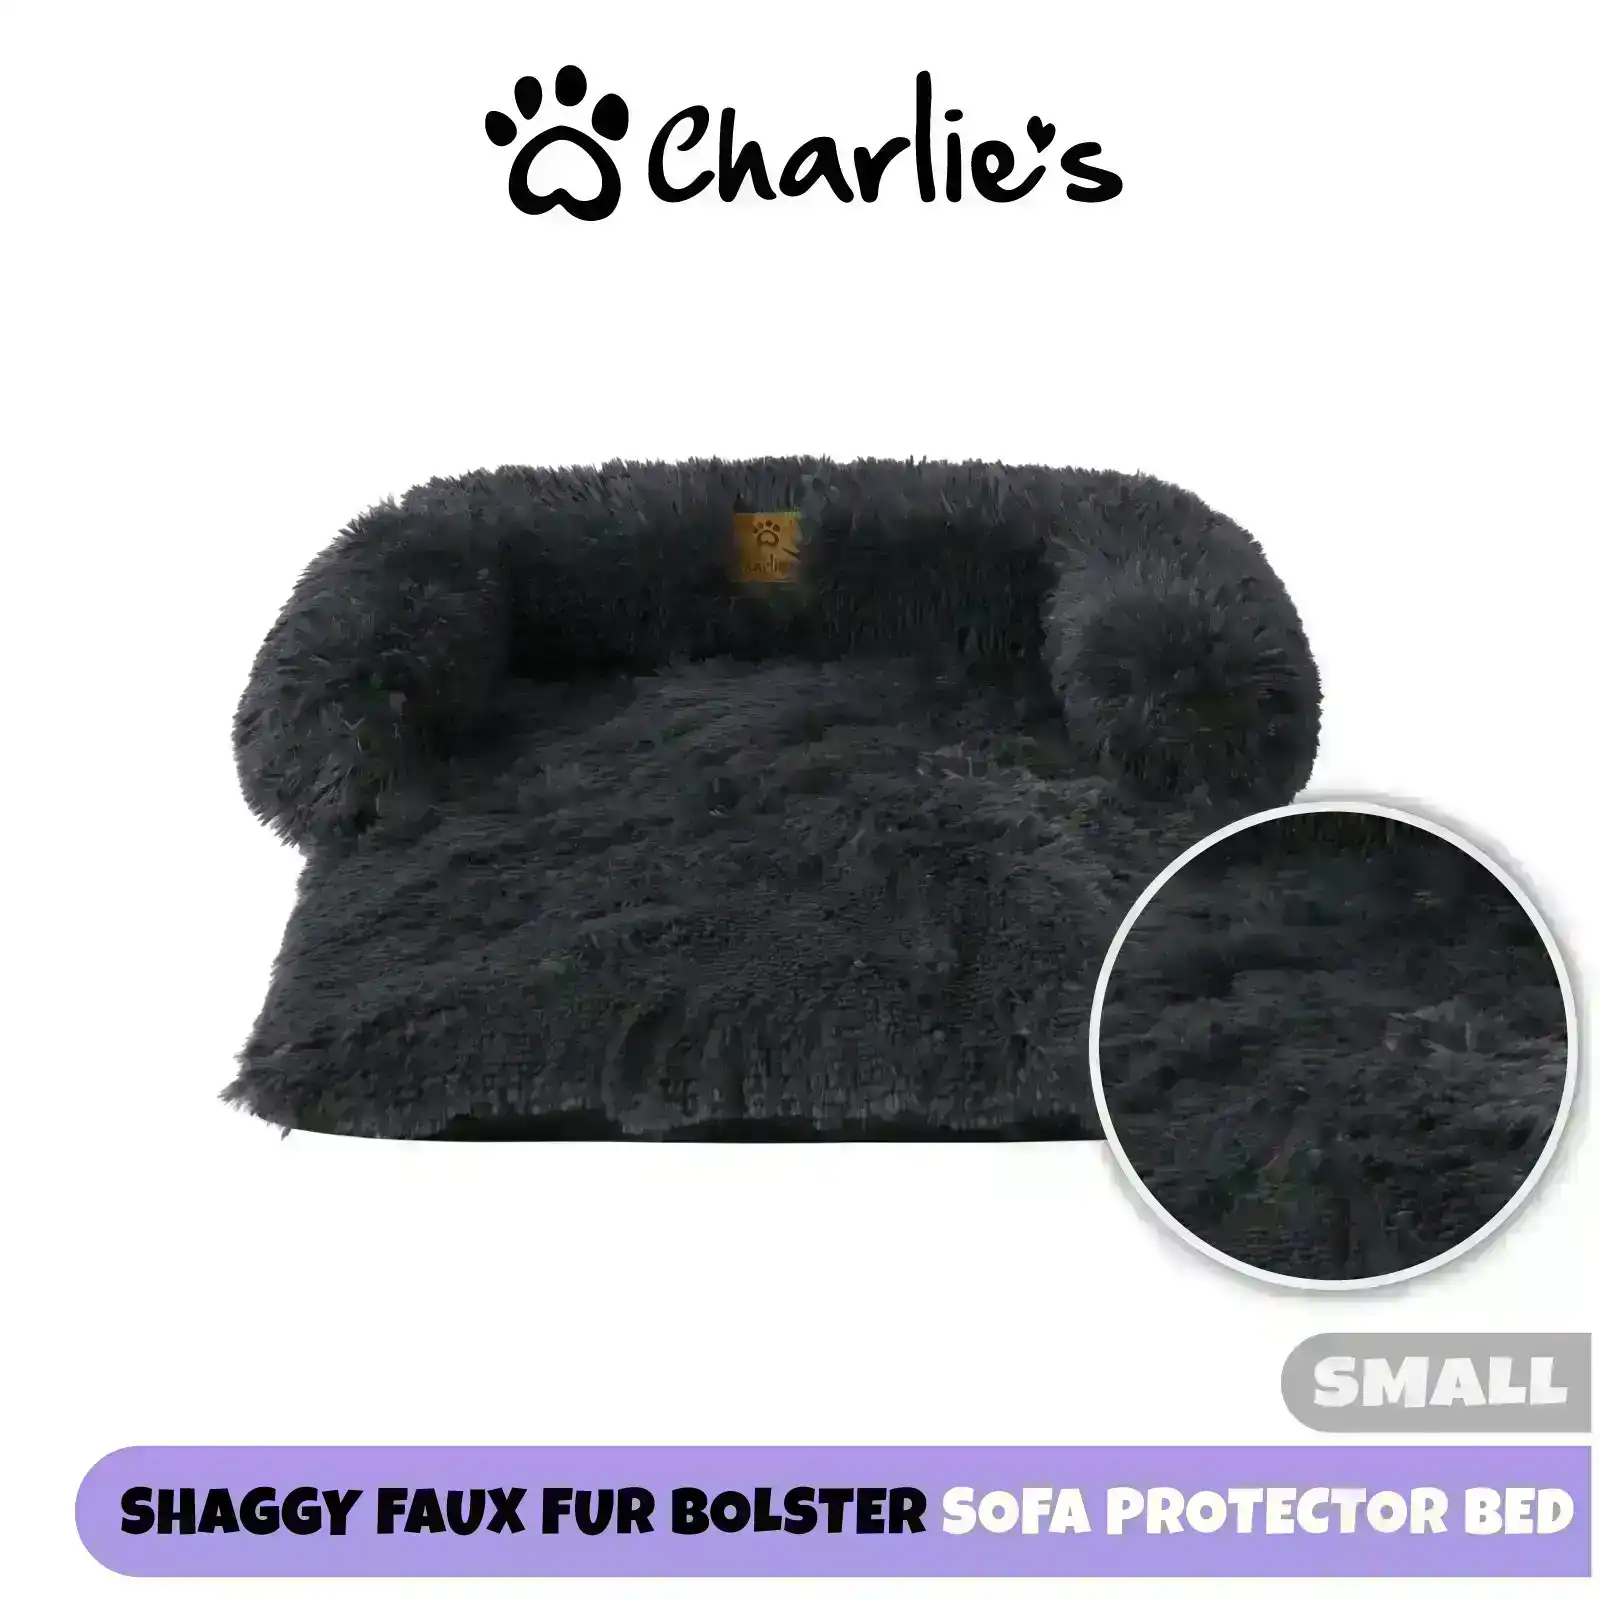 Charlie's Shaggy Faux Fur Bolster Sofa Protector Calming Dog Bed Charcoal Small